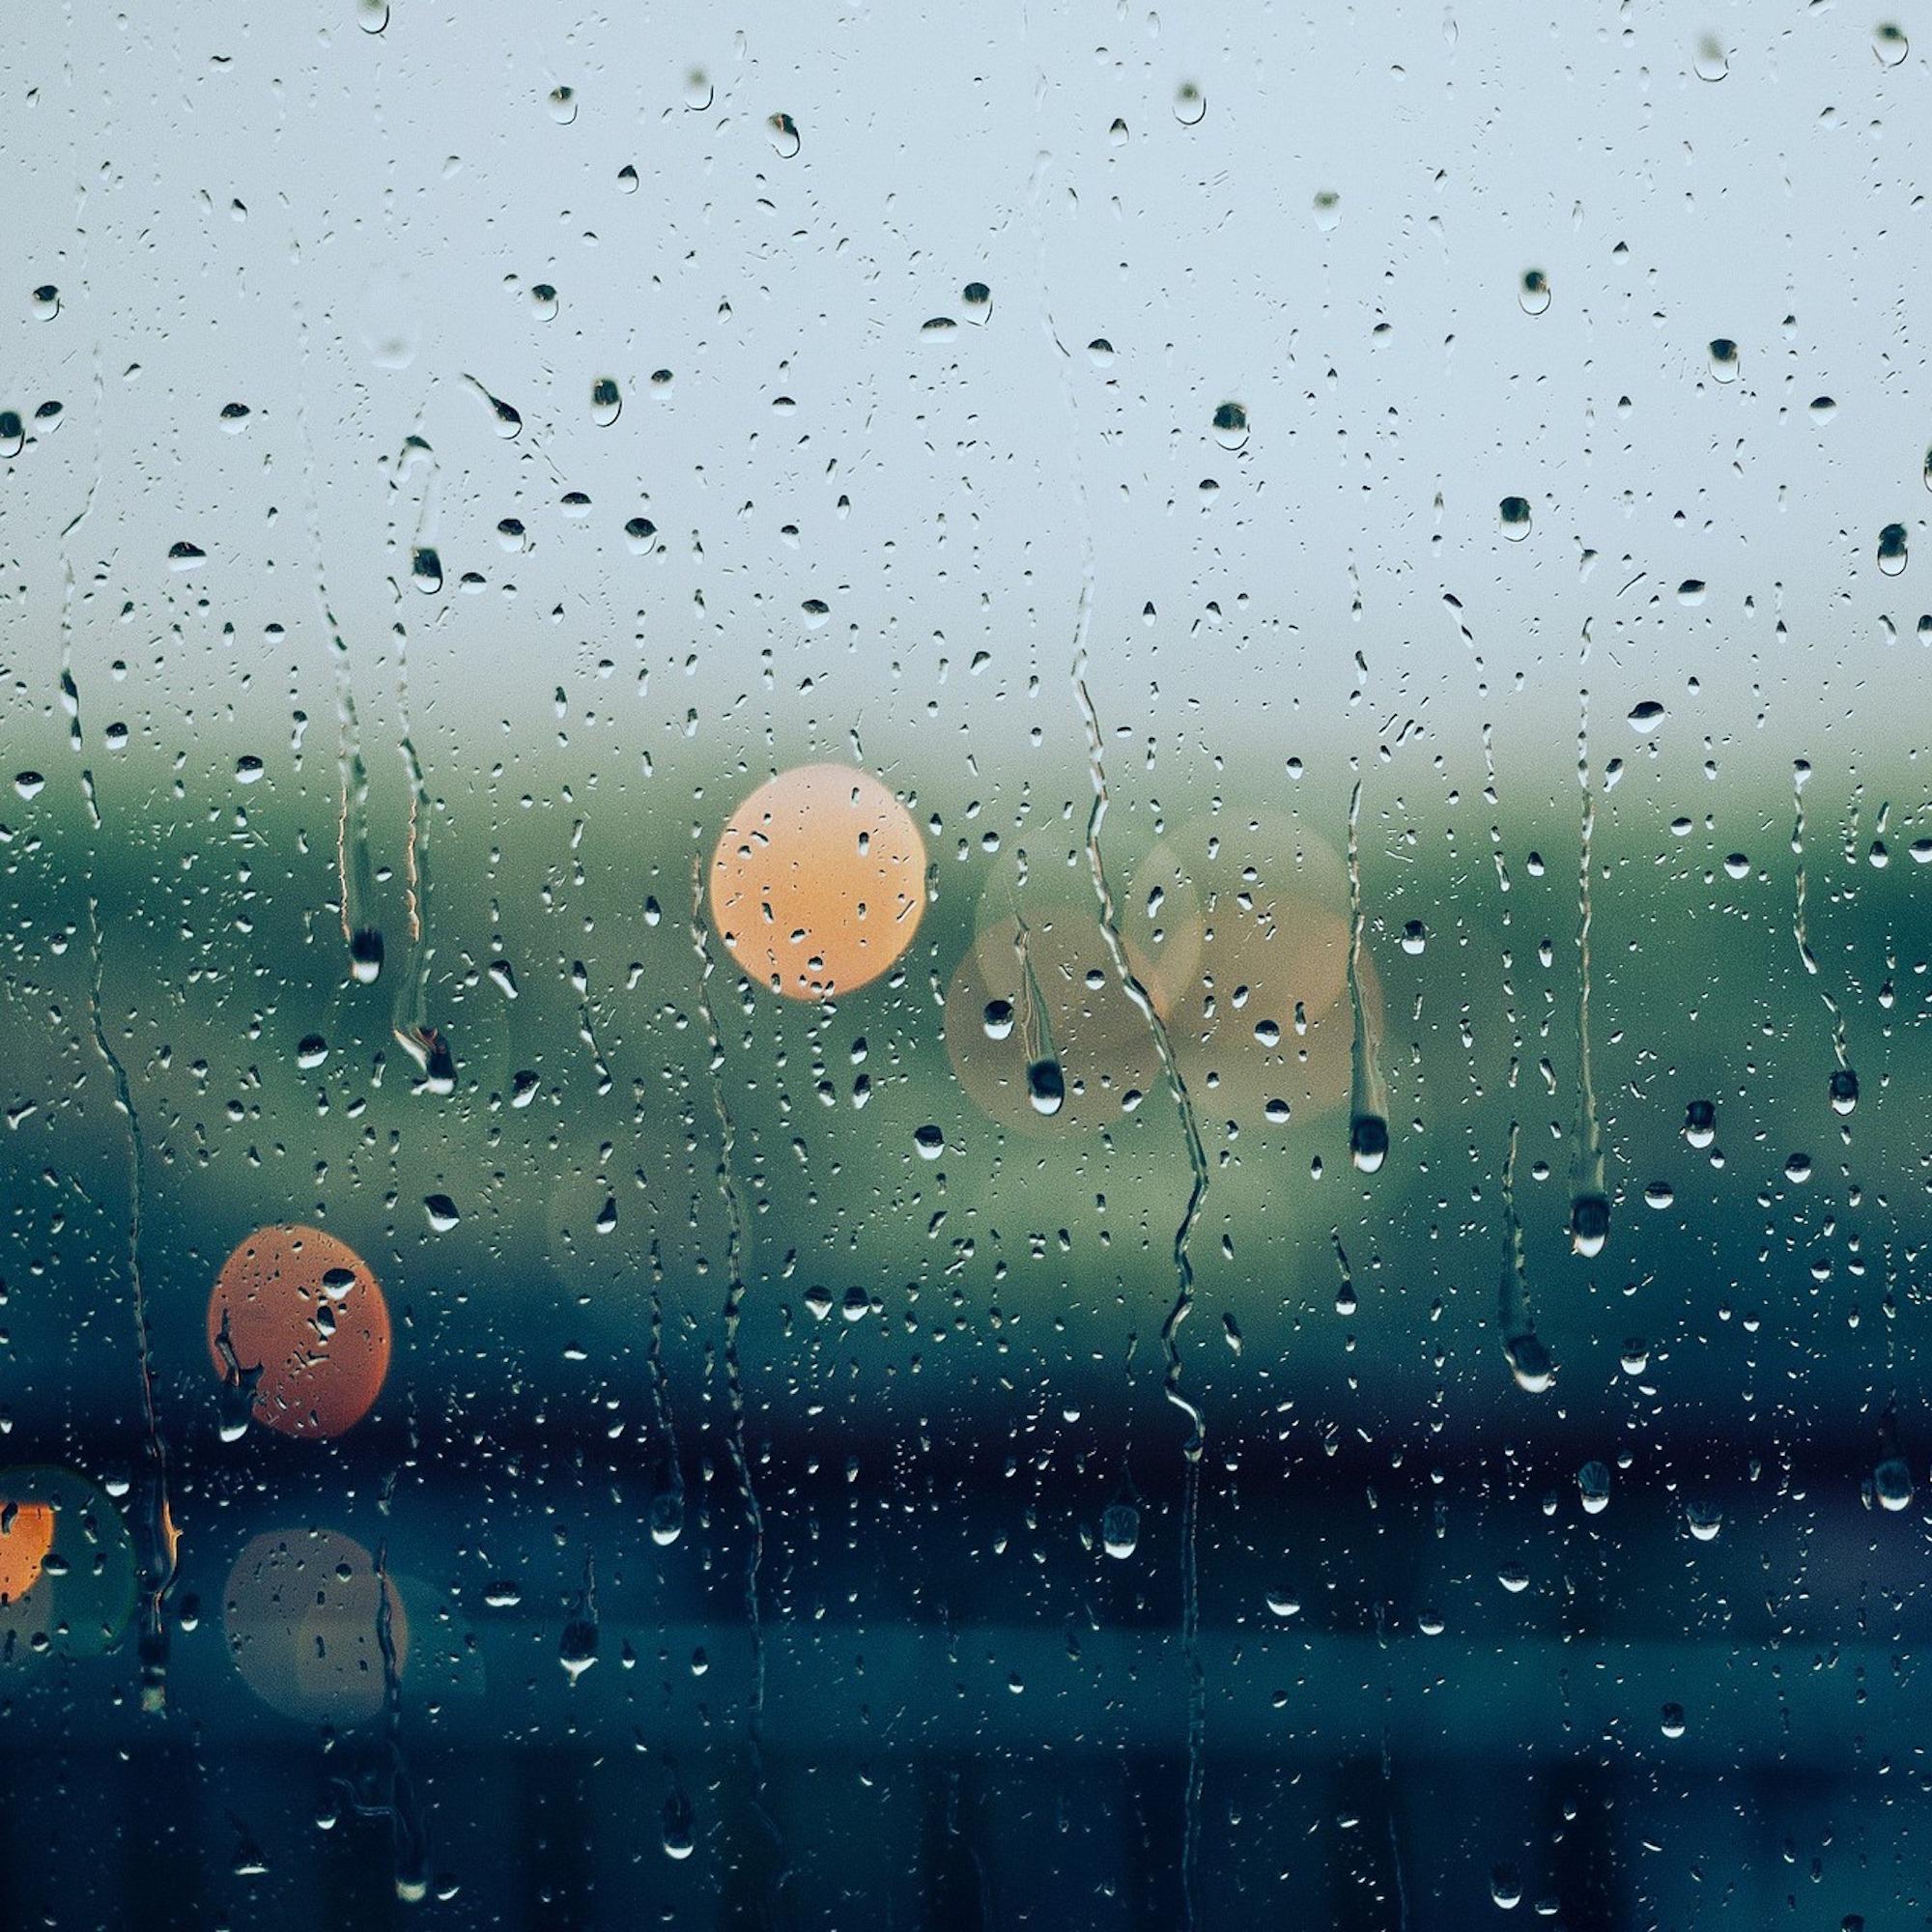 11 Gentle Rain & Nature Focus Recordings to Relax and Inspire